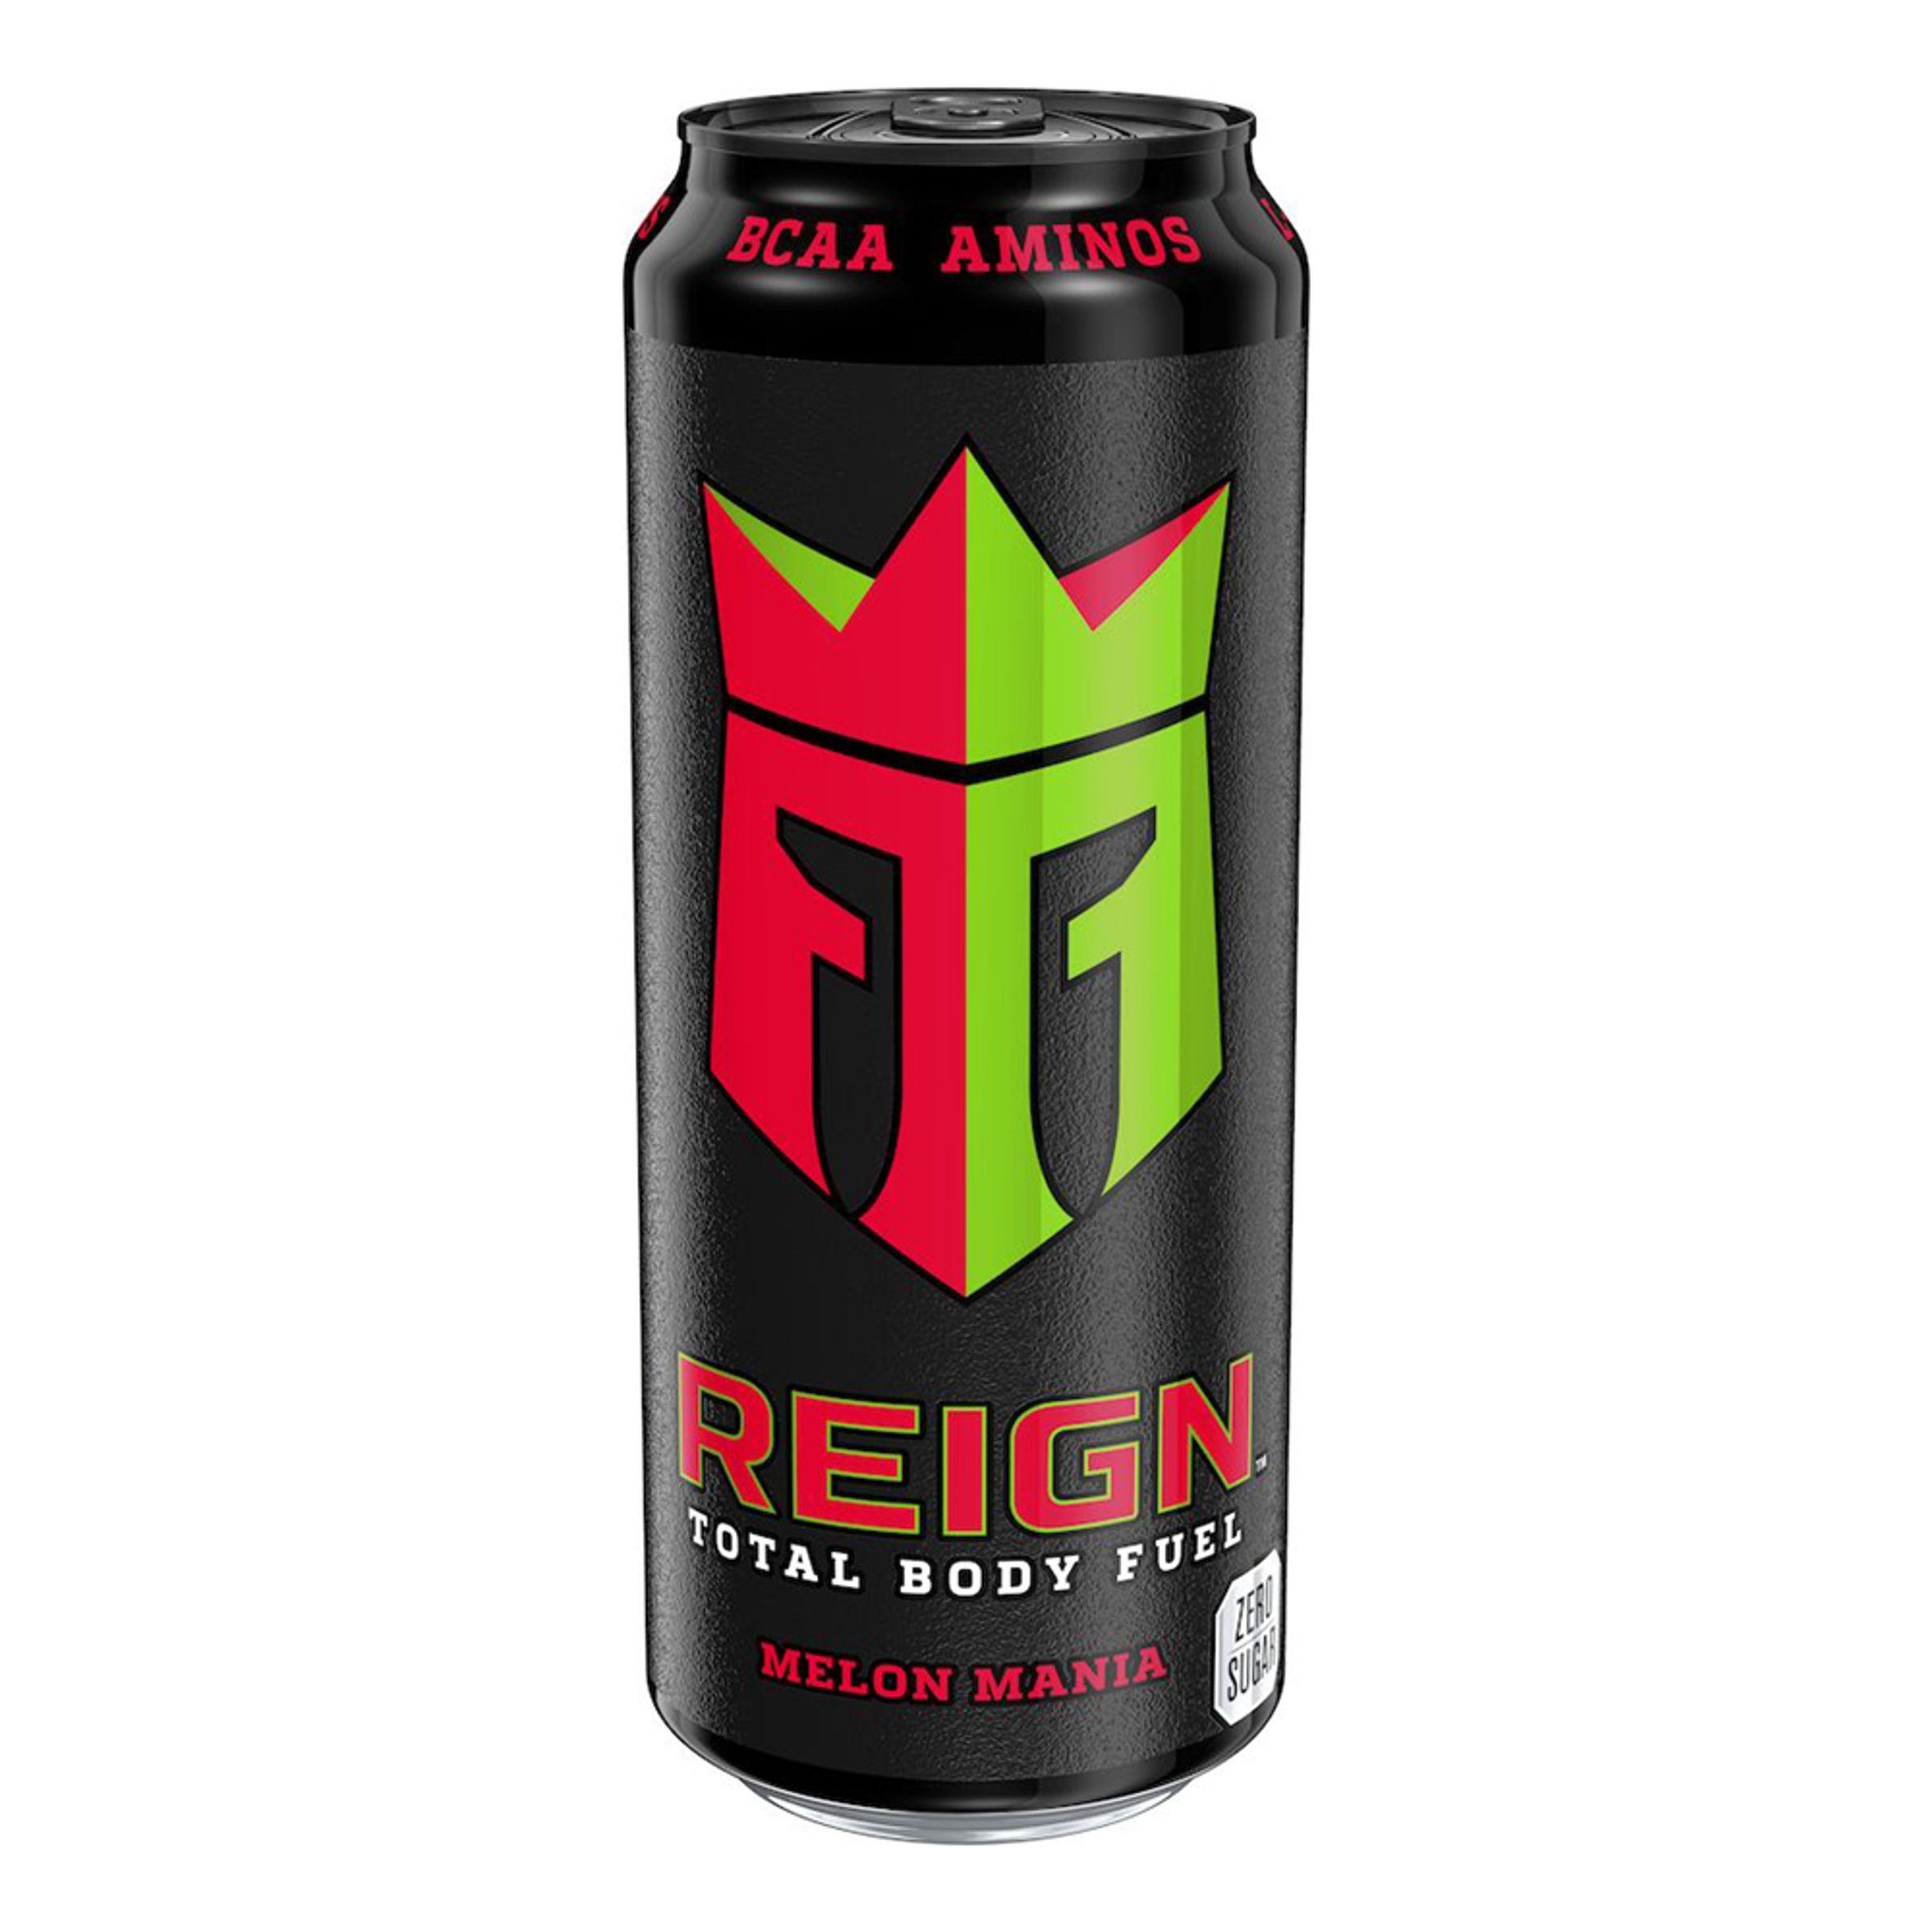 Reign Melon Mania Energidryck - 12-pack